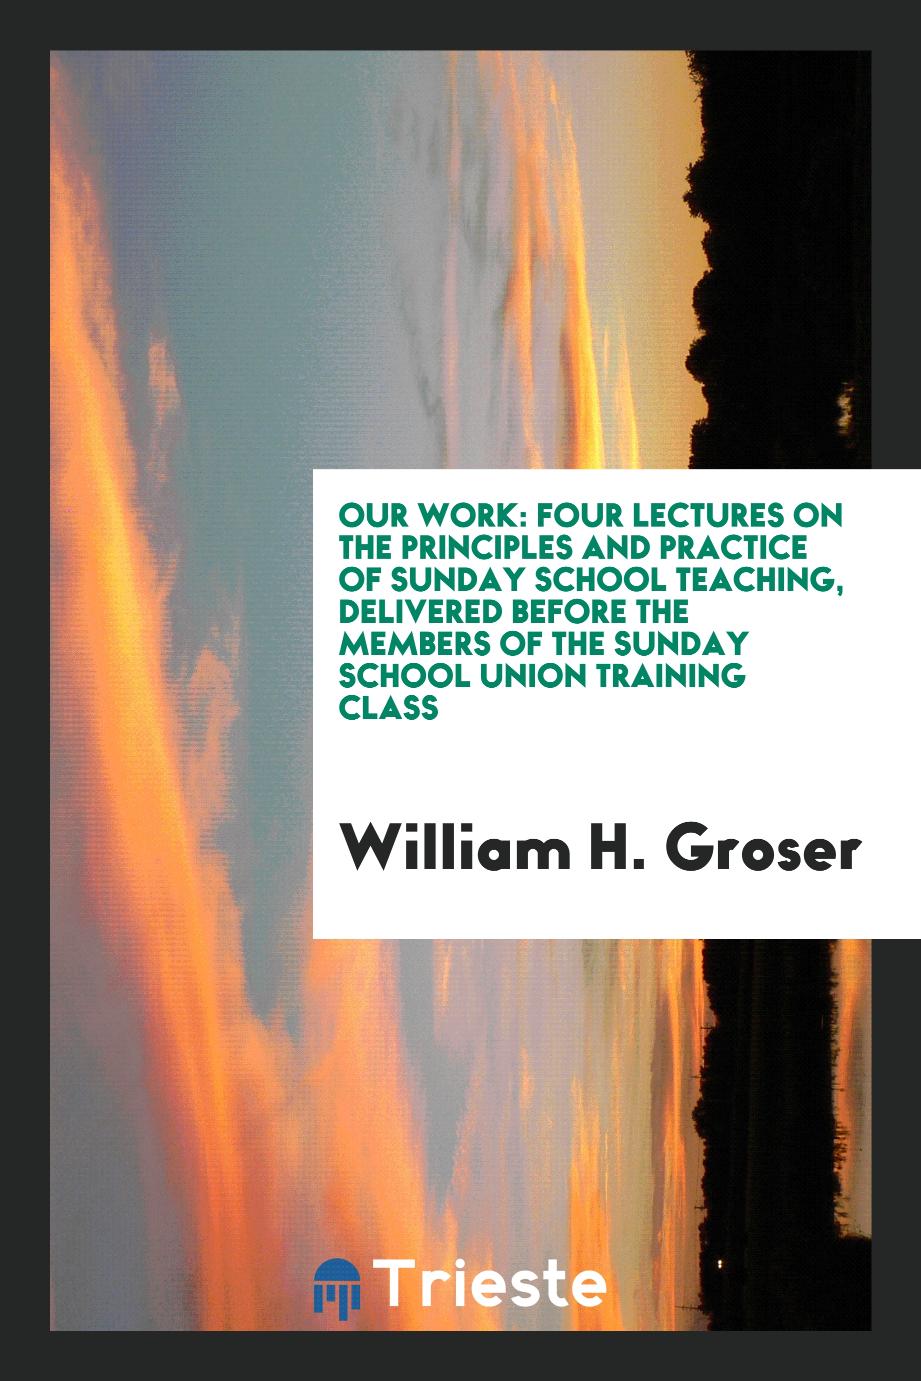 Our work: four lectures on the principles and practice of Sunday school teaching, delivered before the members of the Sunday school union training class